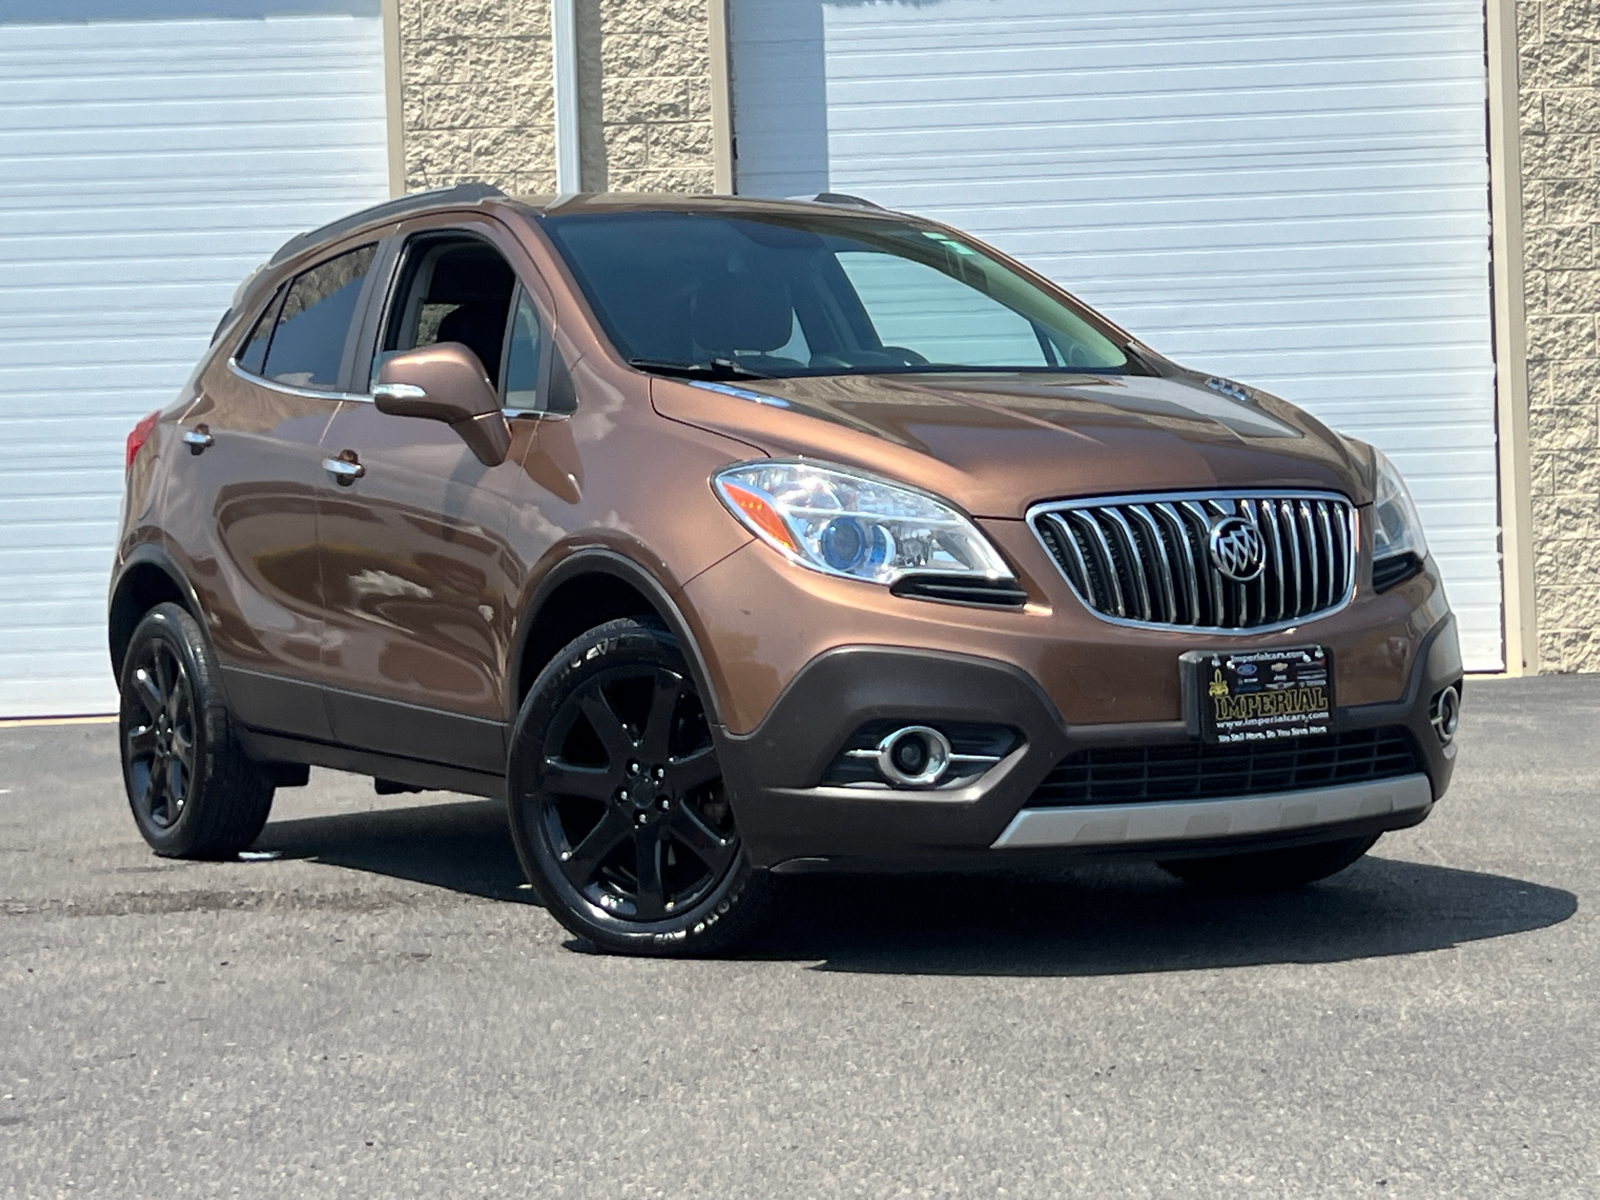 2016 Buick Encore Leather 2